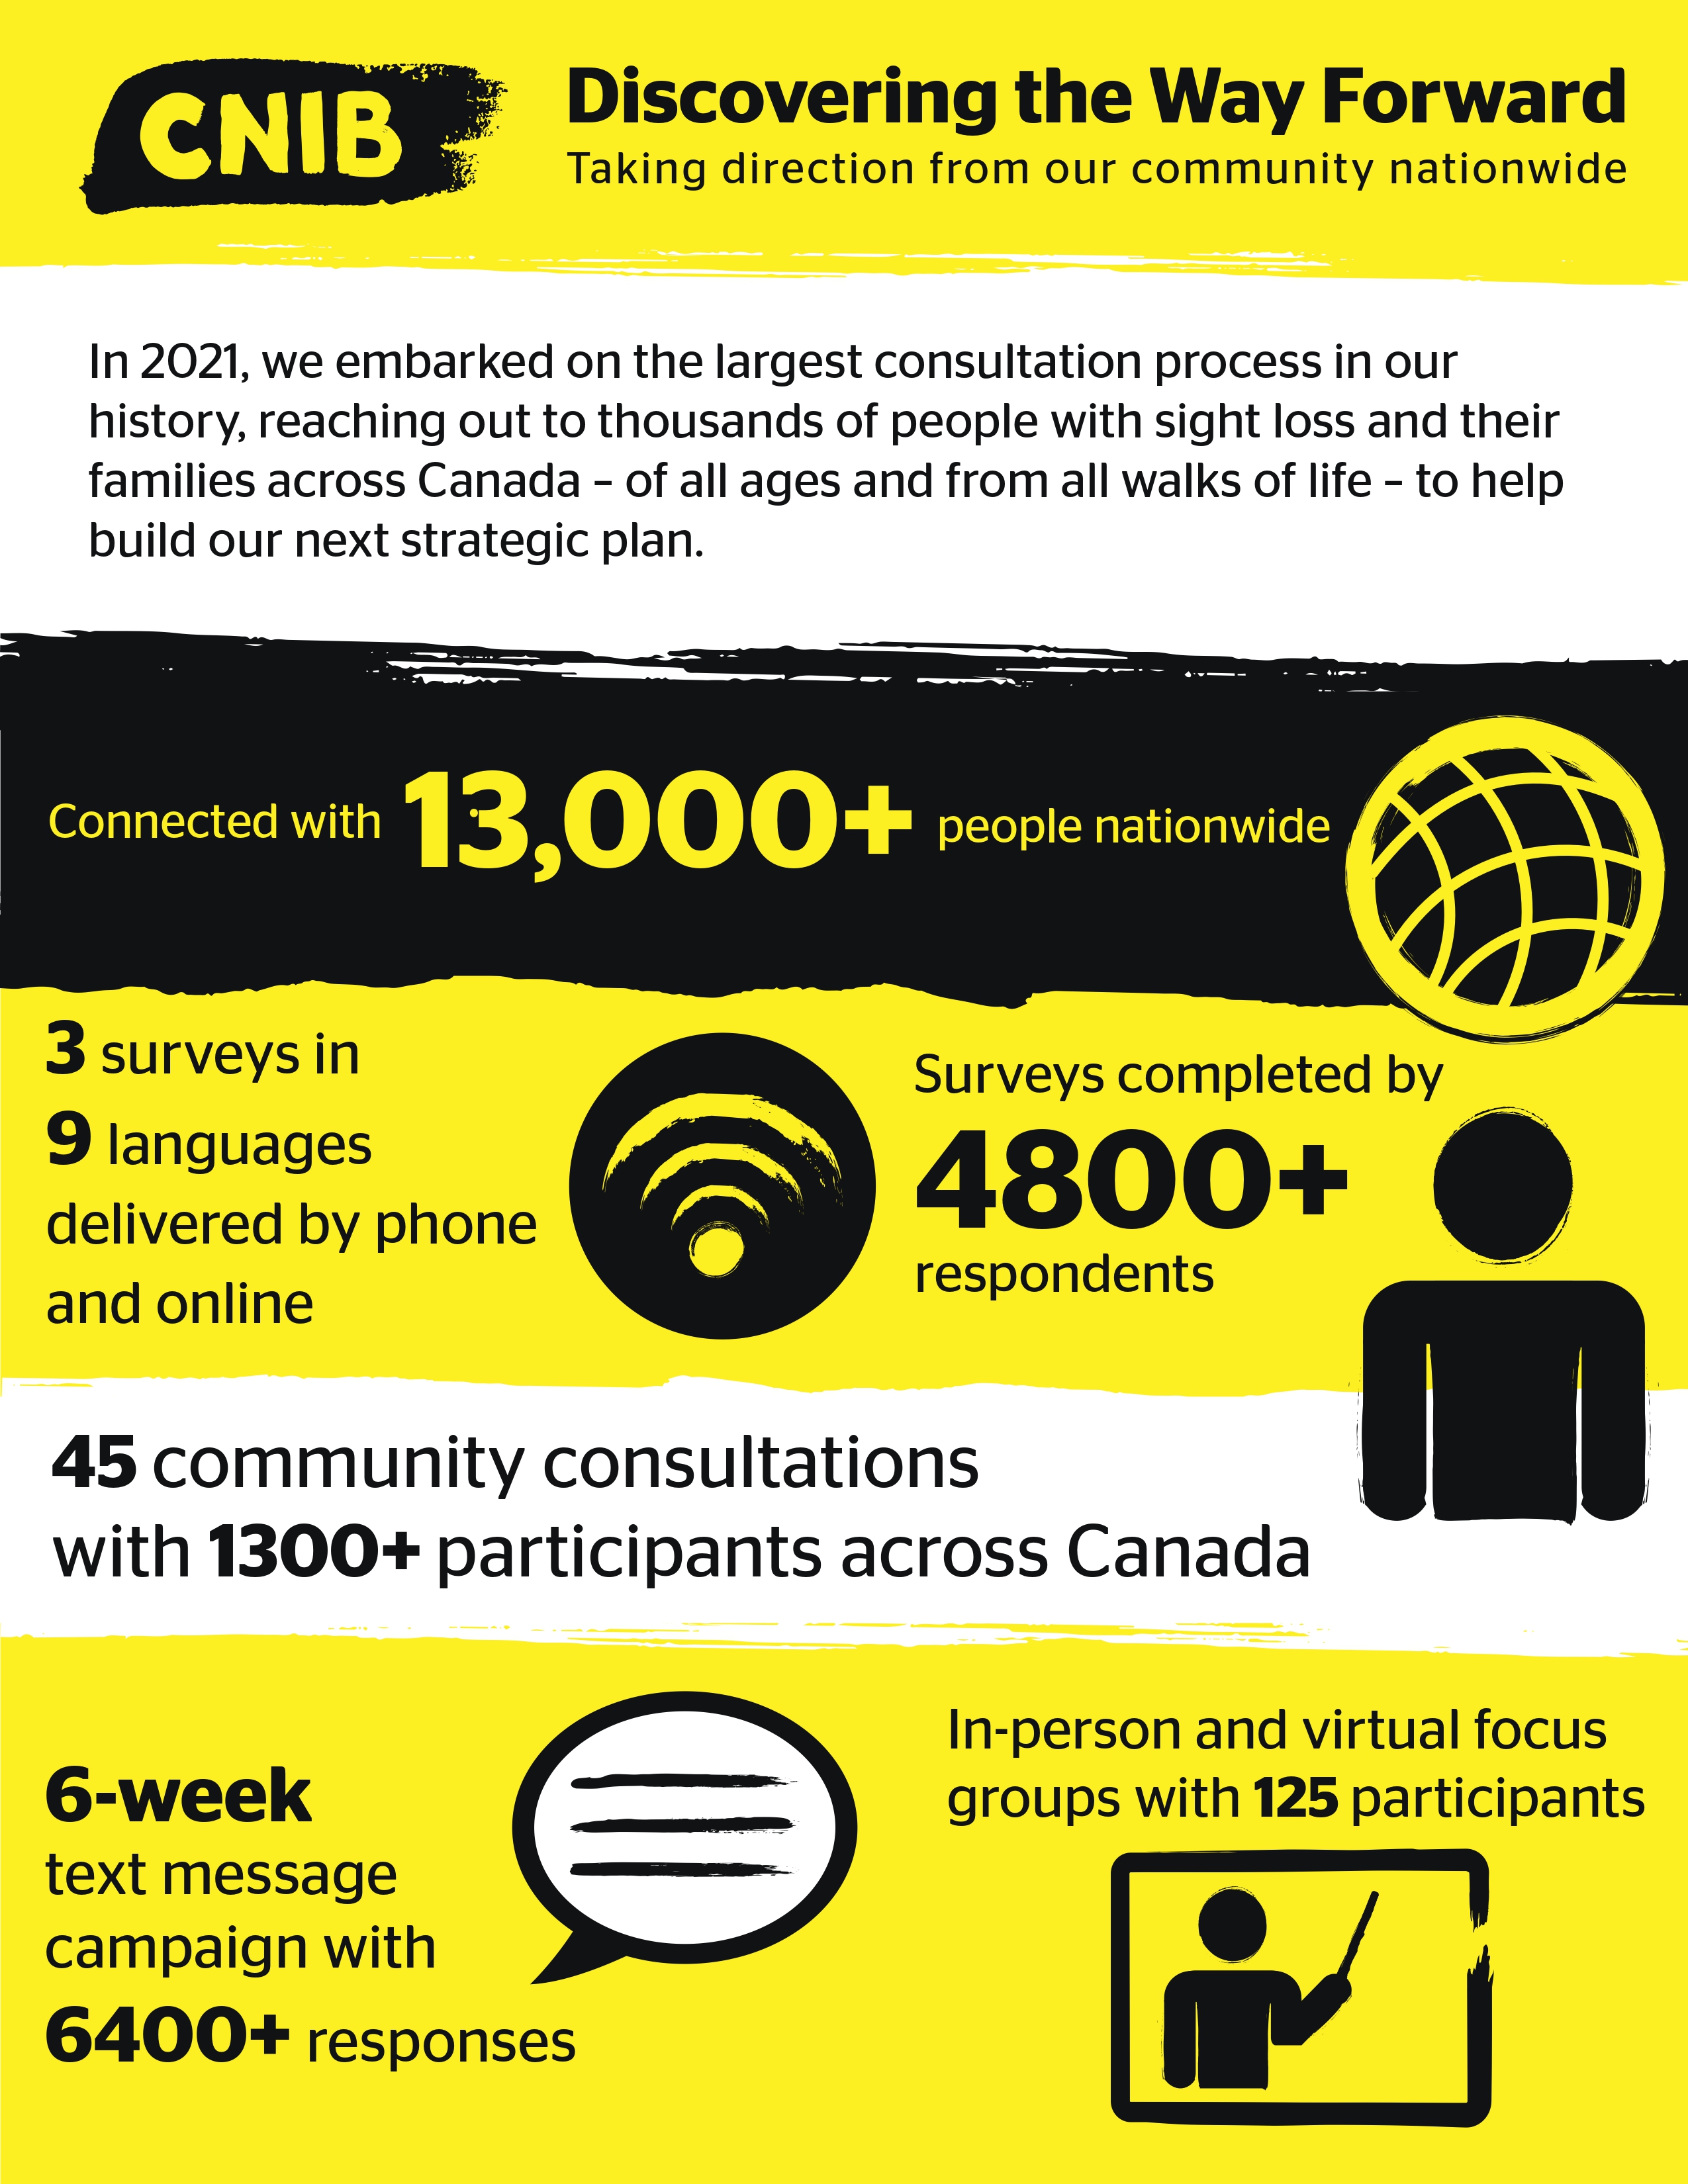 Image of an infographic displaying various statistics about CNIB’s strategic plan consultation process